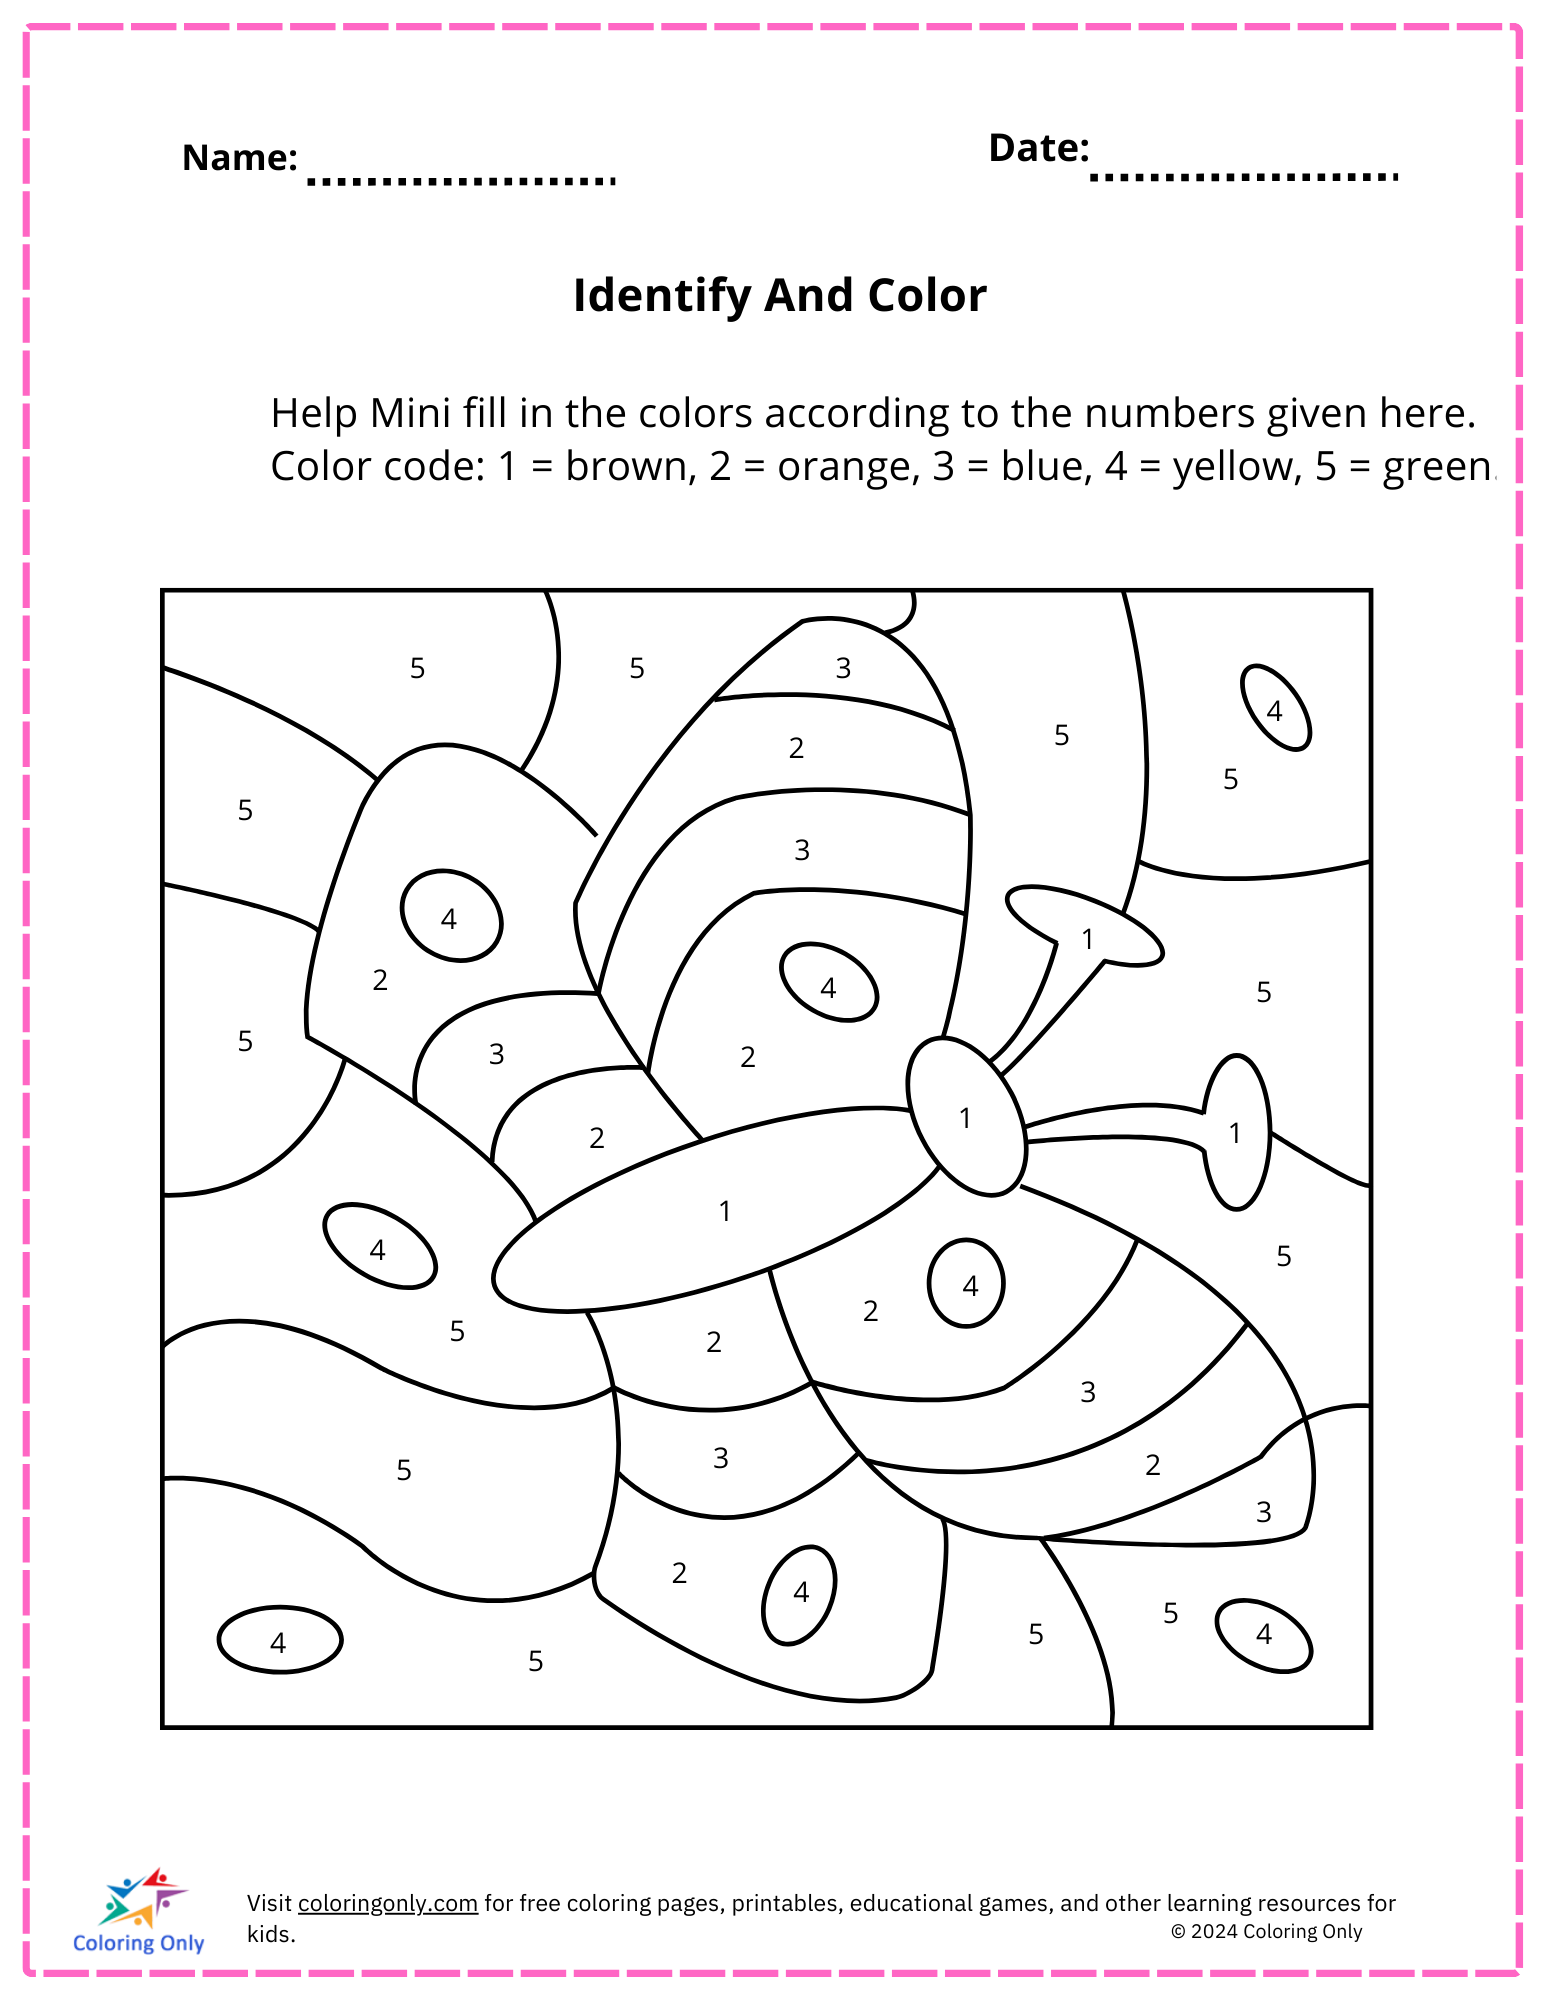 Identify And Color  Free Printable Worksheet